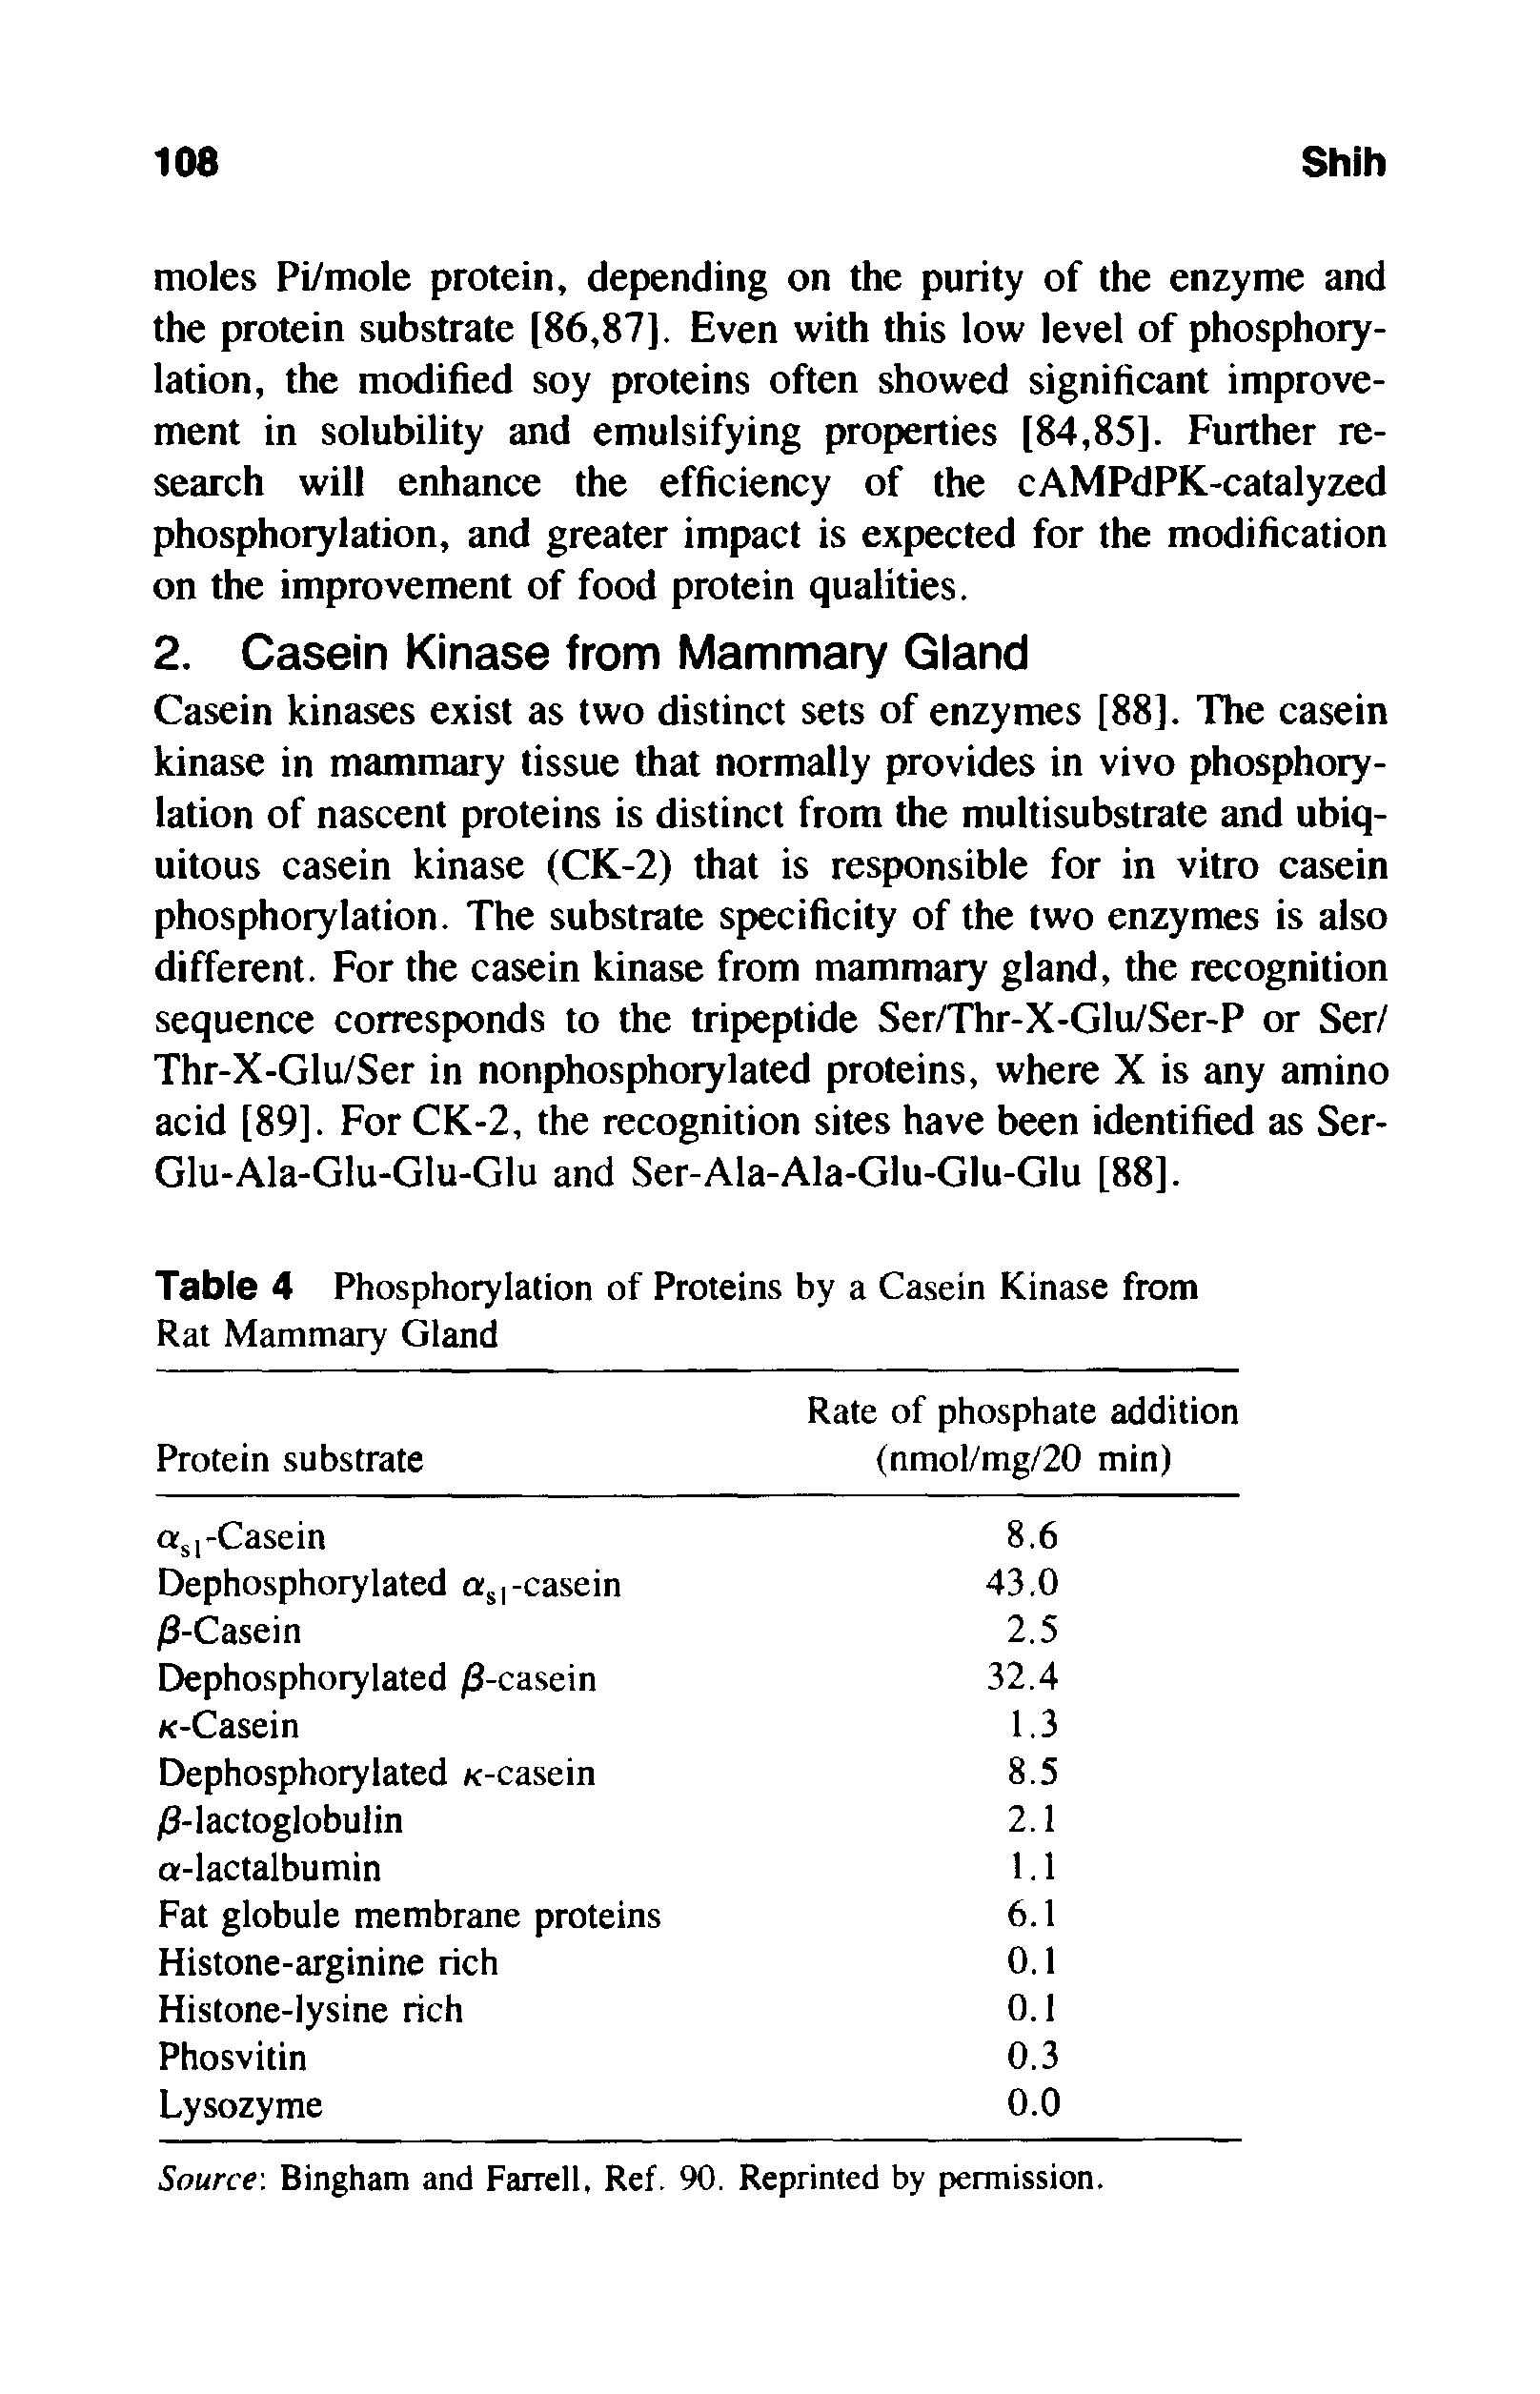 Table 4 Phosphorylation of Proteins by a Casein Kinase from Rat Mammary Gland...